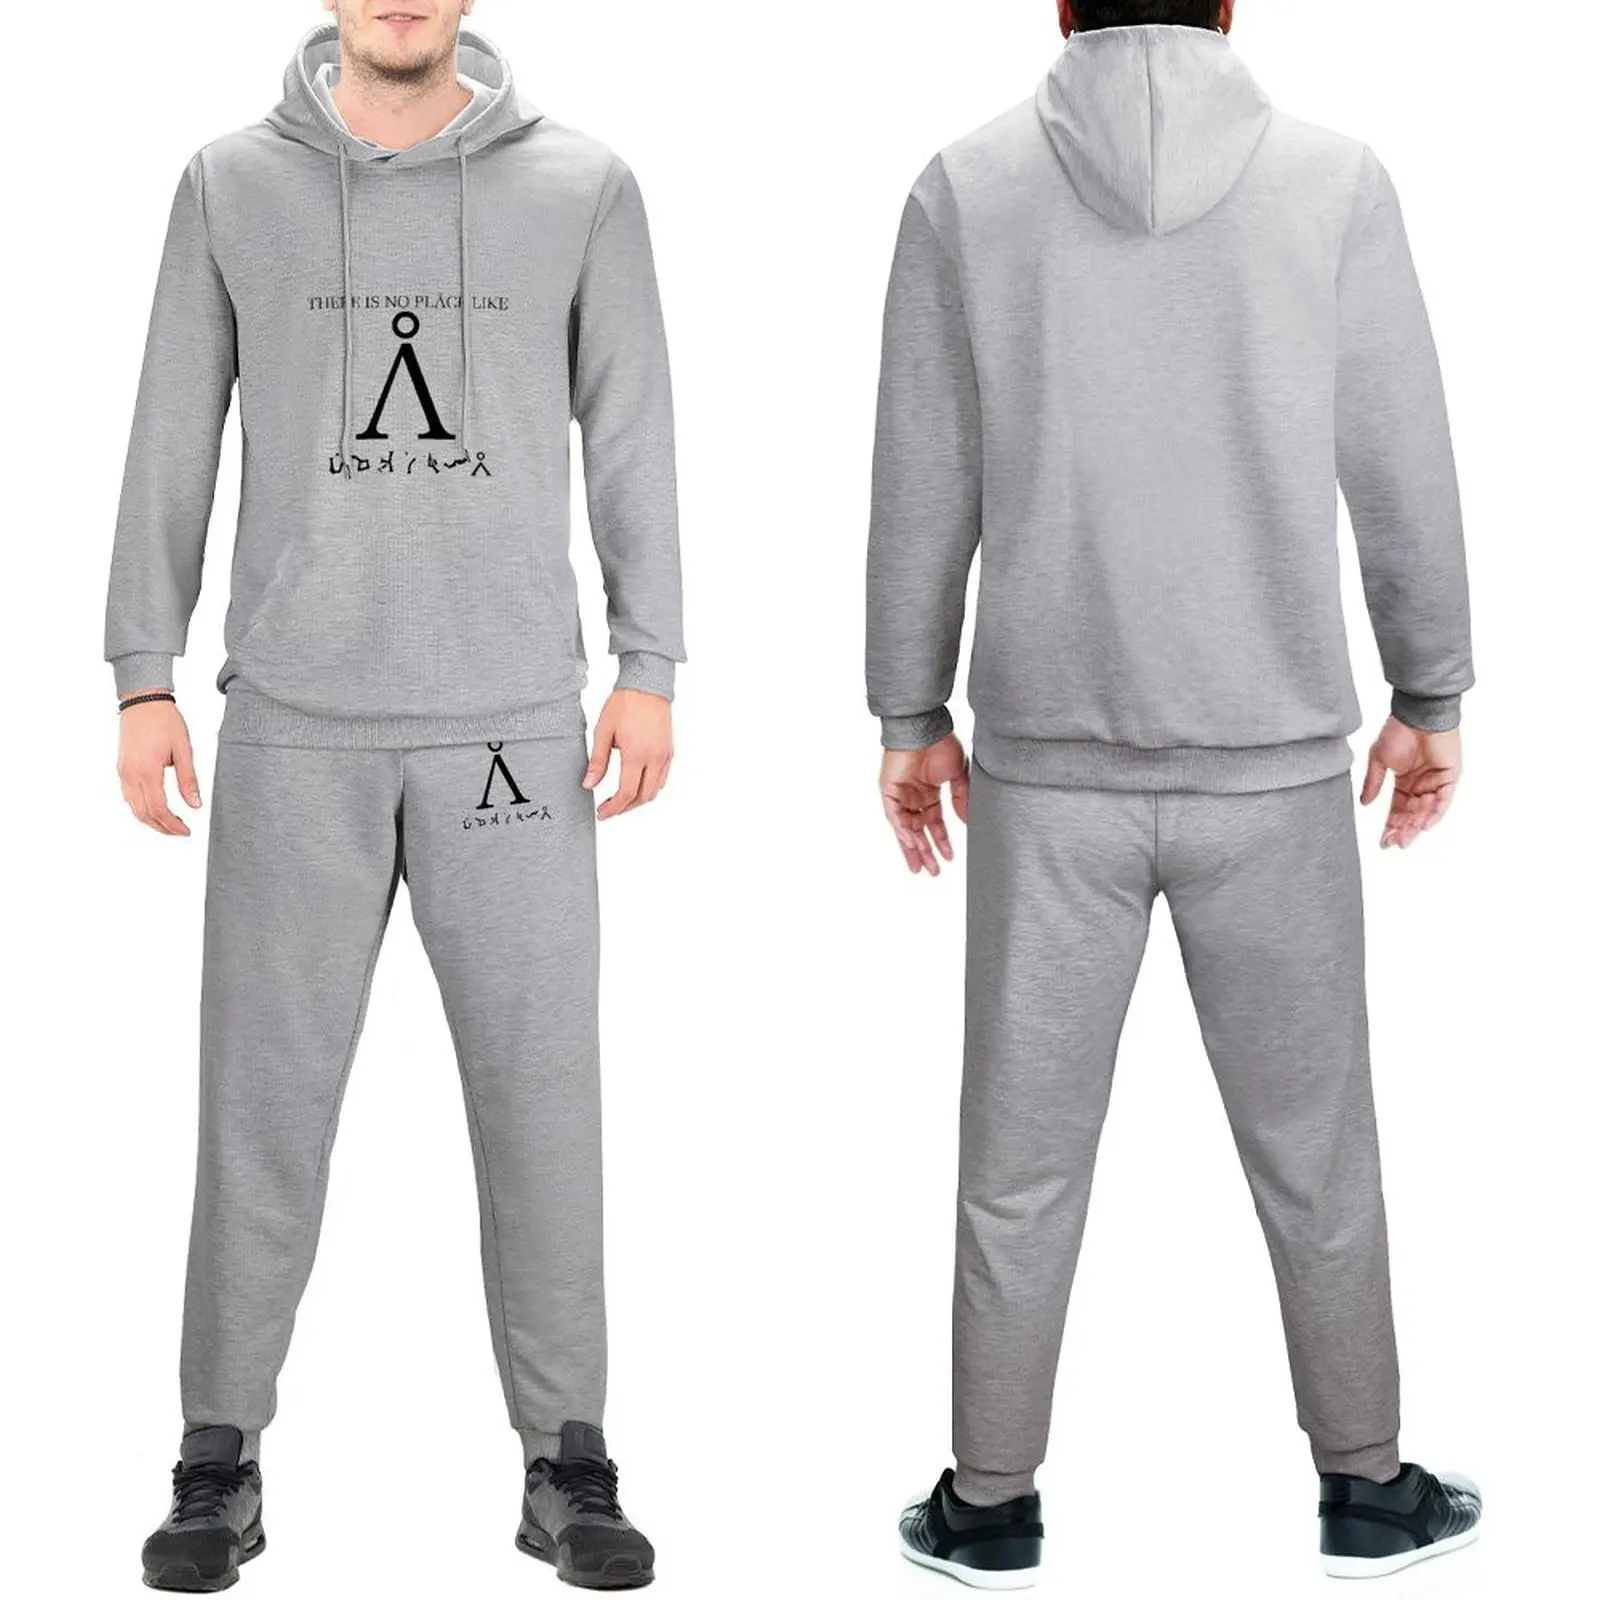 

Stargate Tracksuit Set Stargate SG1 - There Is No Place Like Earth Winter Sweatsuits Man Sweatpants and Hoodie Set Sale